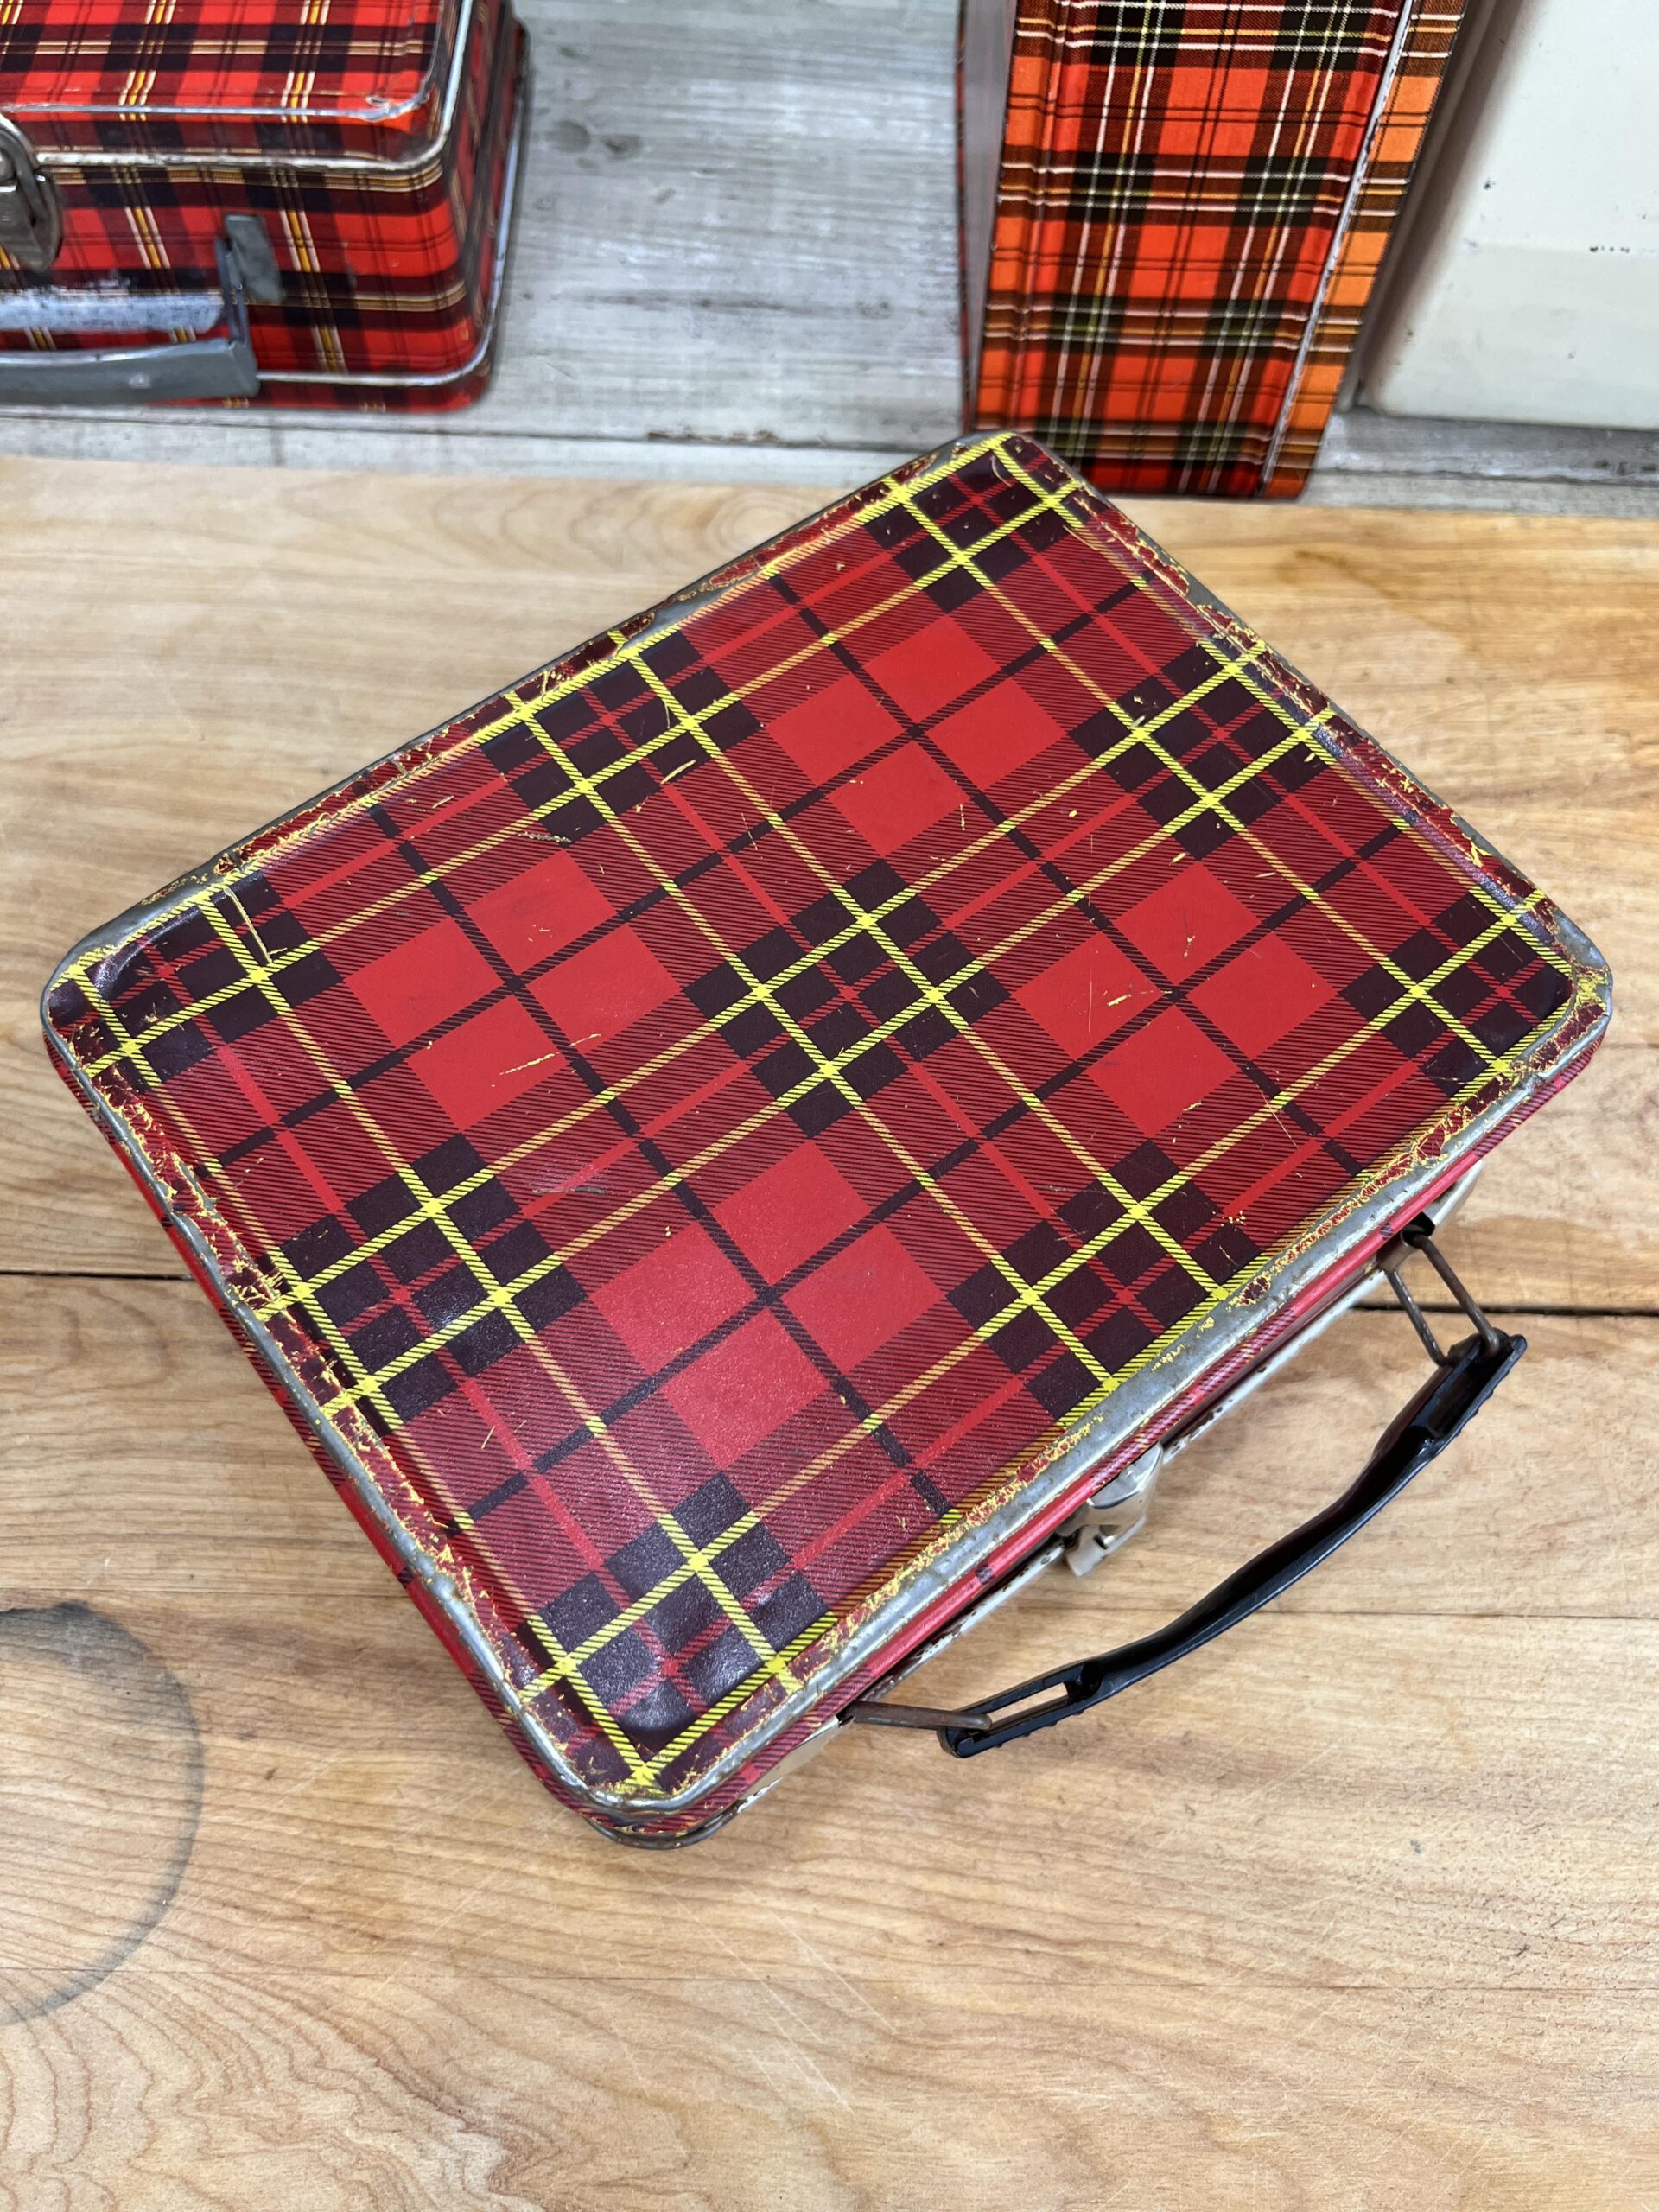 https://thejunkparlor.com/wp-content/uploads/2023/06/vintage-tartan-plaid-lunch-box-16-min-scaled.jpg